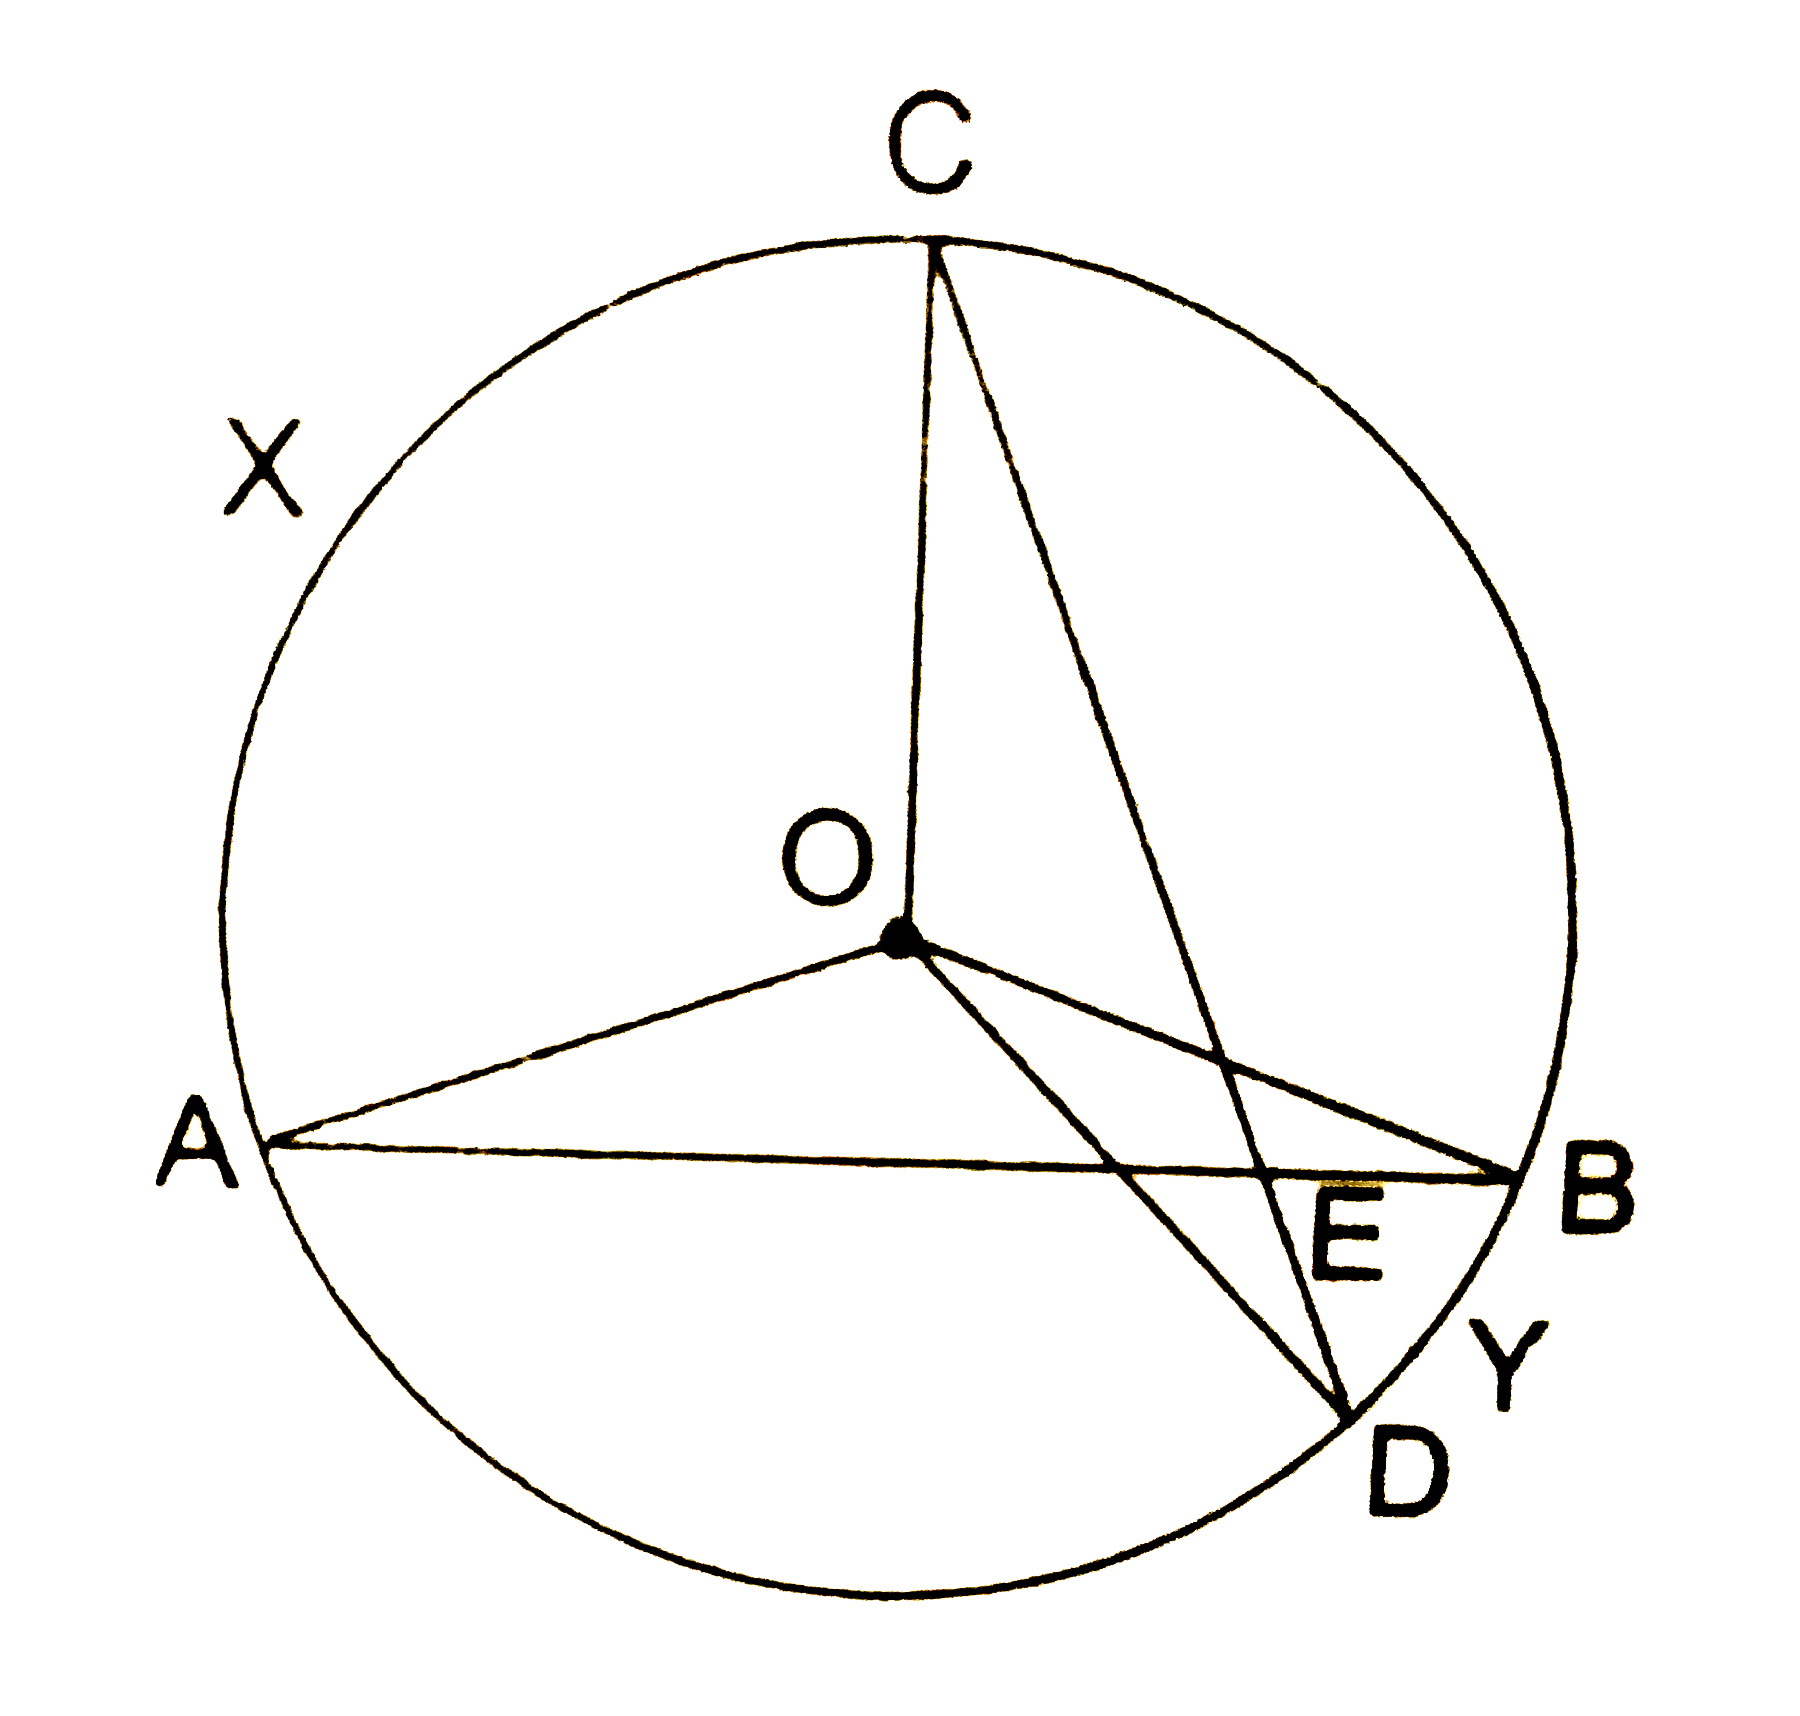 In the given figure, AB and CD are two chords of a circle, intersecting each other at a point E . Prove that   / AEC = (1)/(2) (  angle subtended by arc CXA, at the centre + angle subtended by arc DYB at the centre).